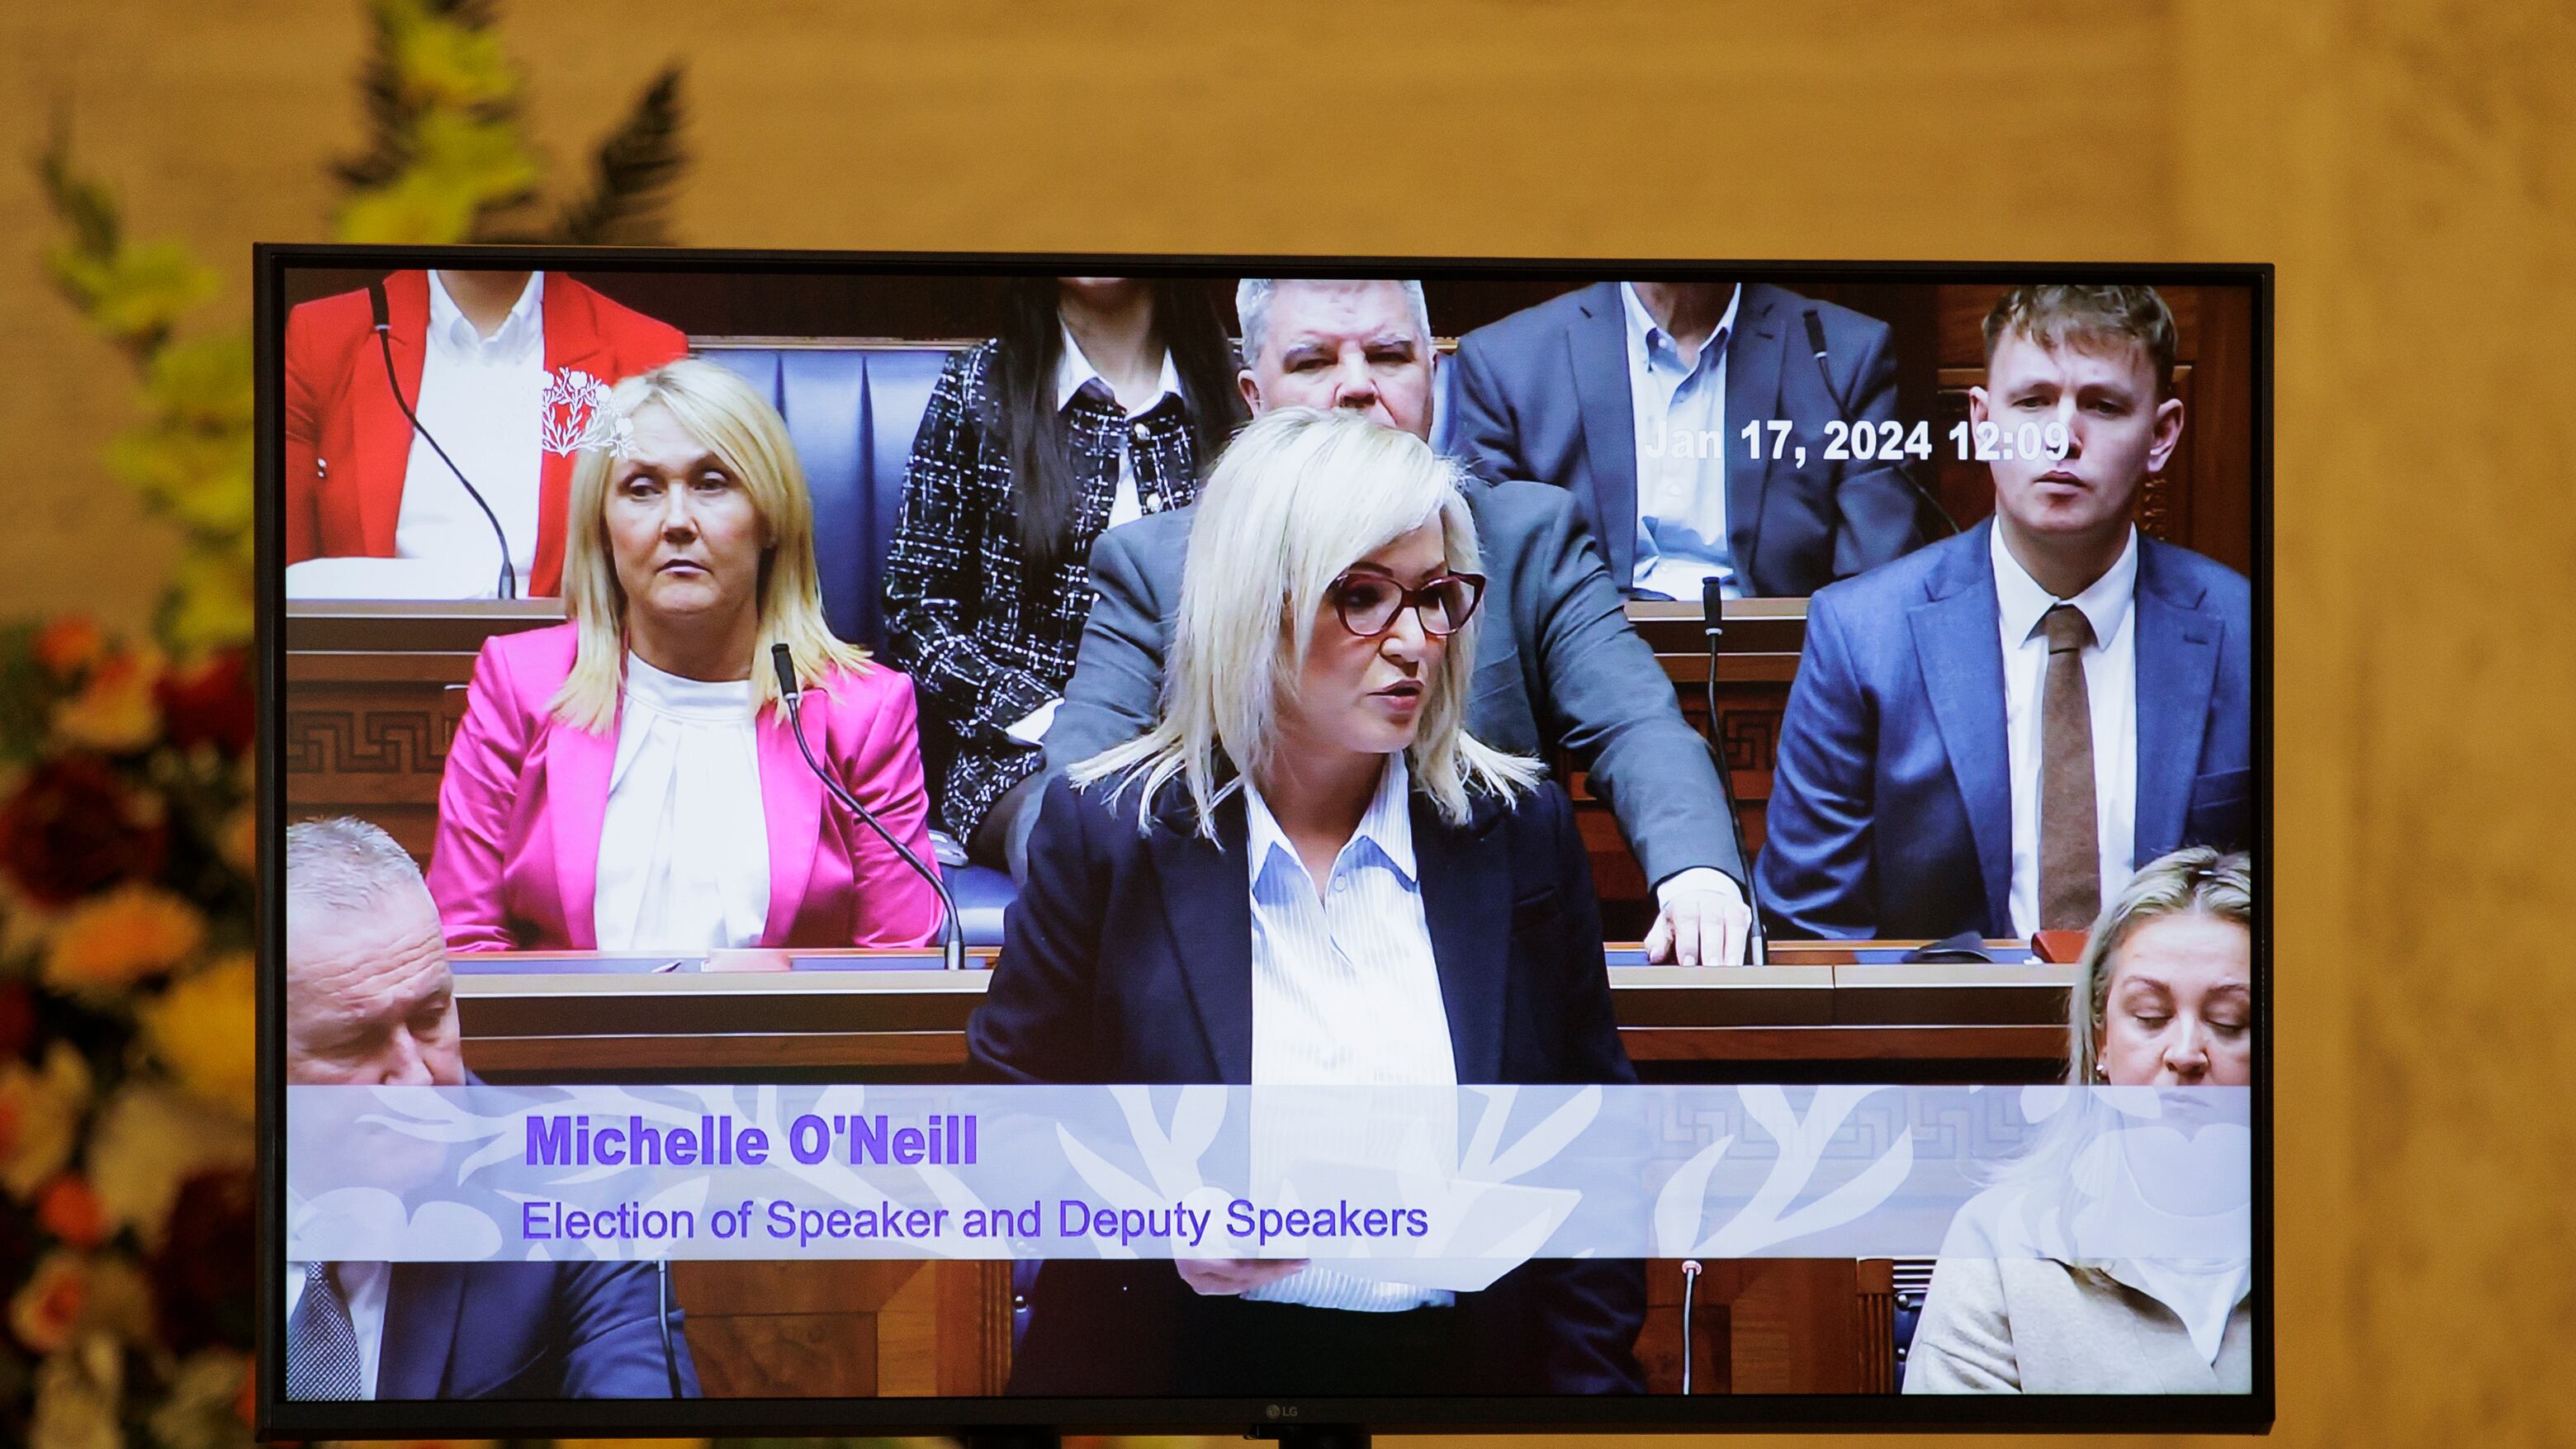 A television screen displays a live feed from the Assembly chamber as Sinn Fein Vice President Michelle O'Neill addresses fellow politicians